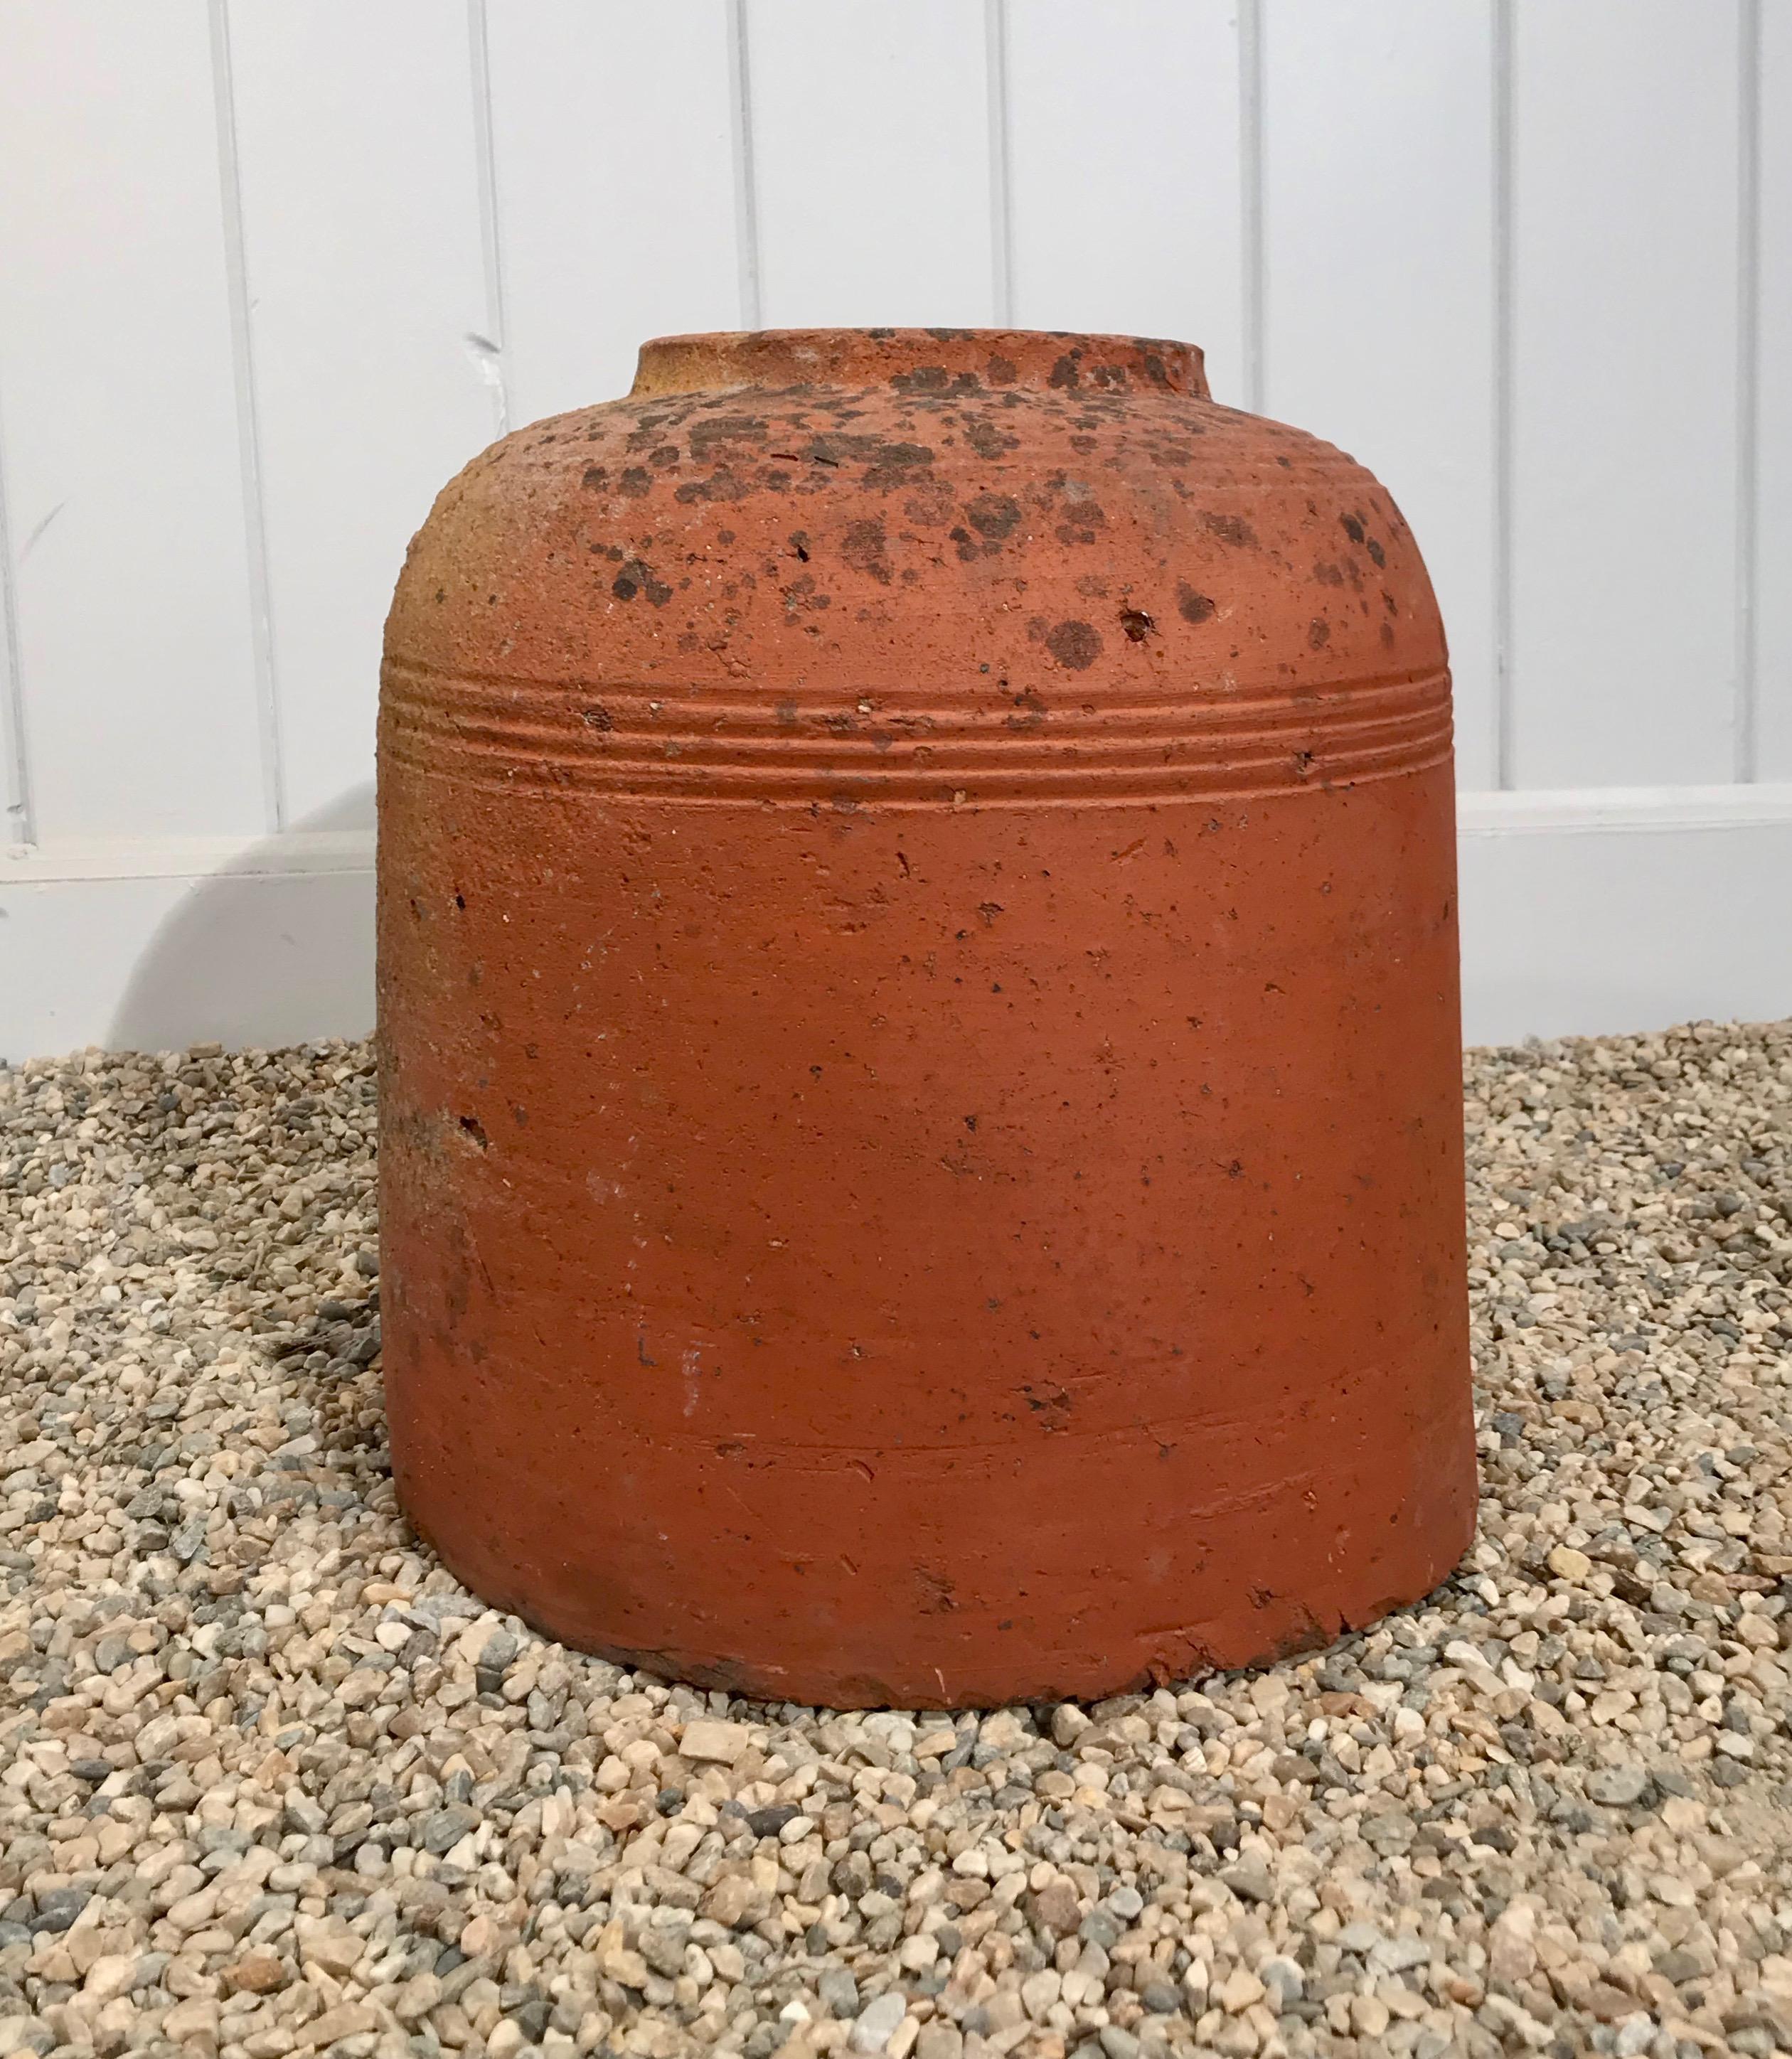 We love old English forcing pots and have three beauties, of which this is the shortest. With sharp incised detail, and in very good condition, it would be lovely in a potager to protect your new shoots from frost damage at night. The three together